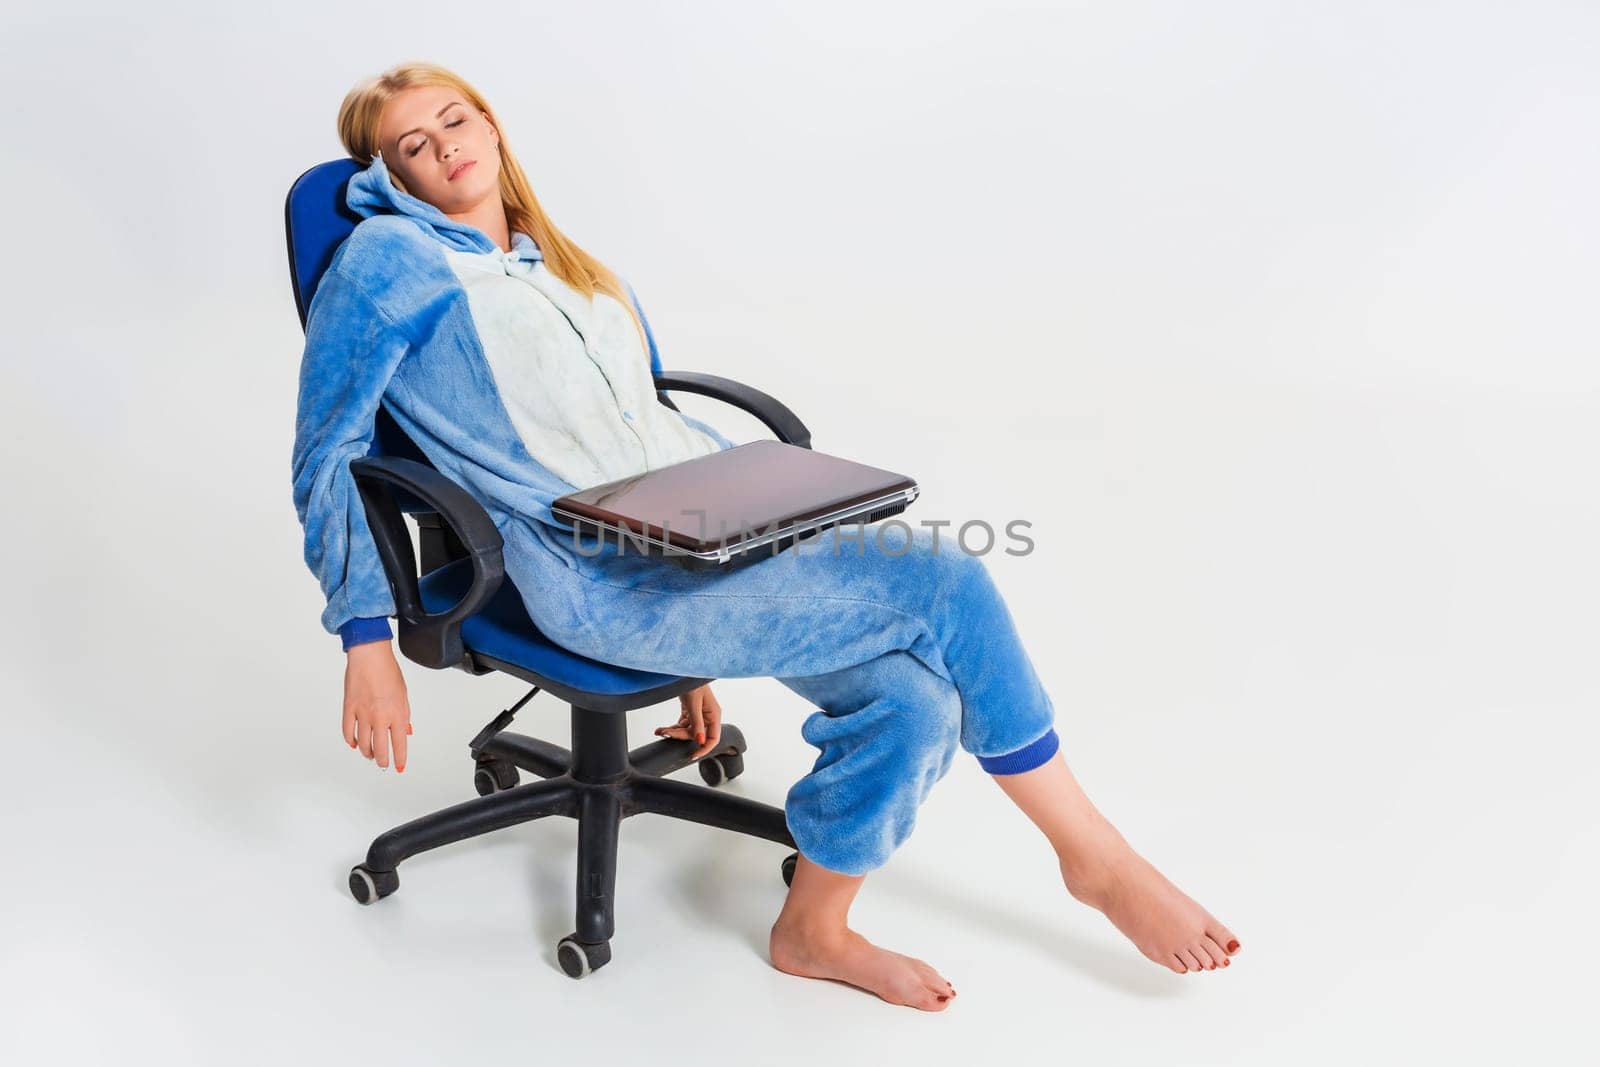 girl in pajamas with a laptop. studying or doing online shopping. work from home. tired of sleeping in a chair